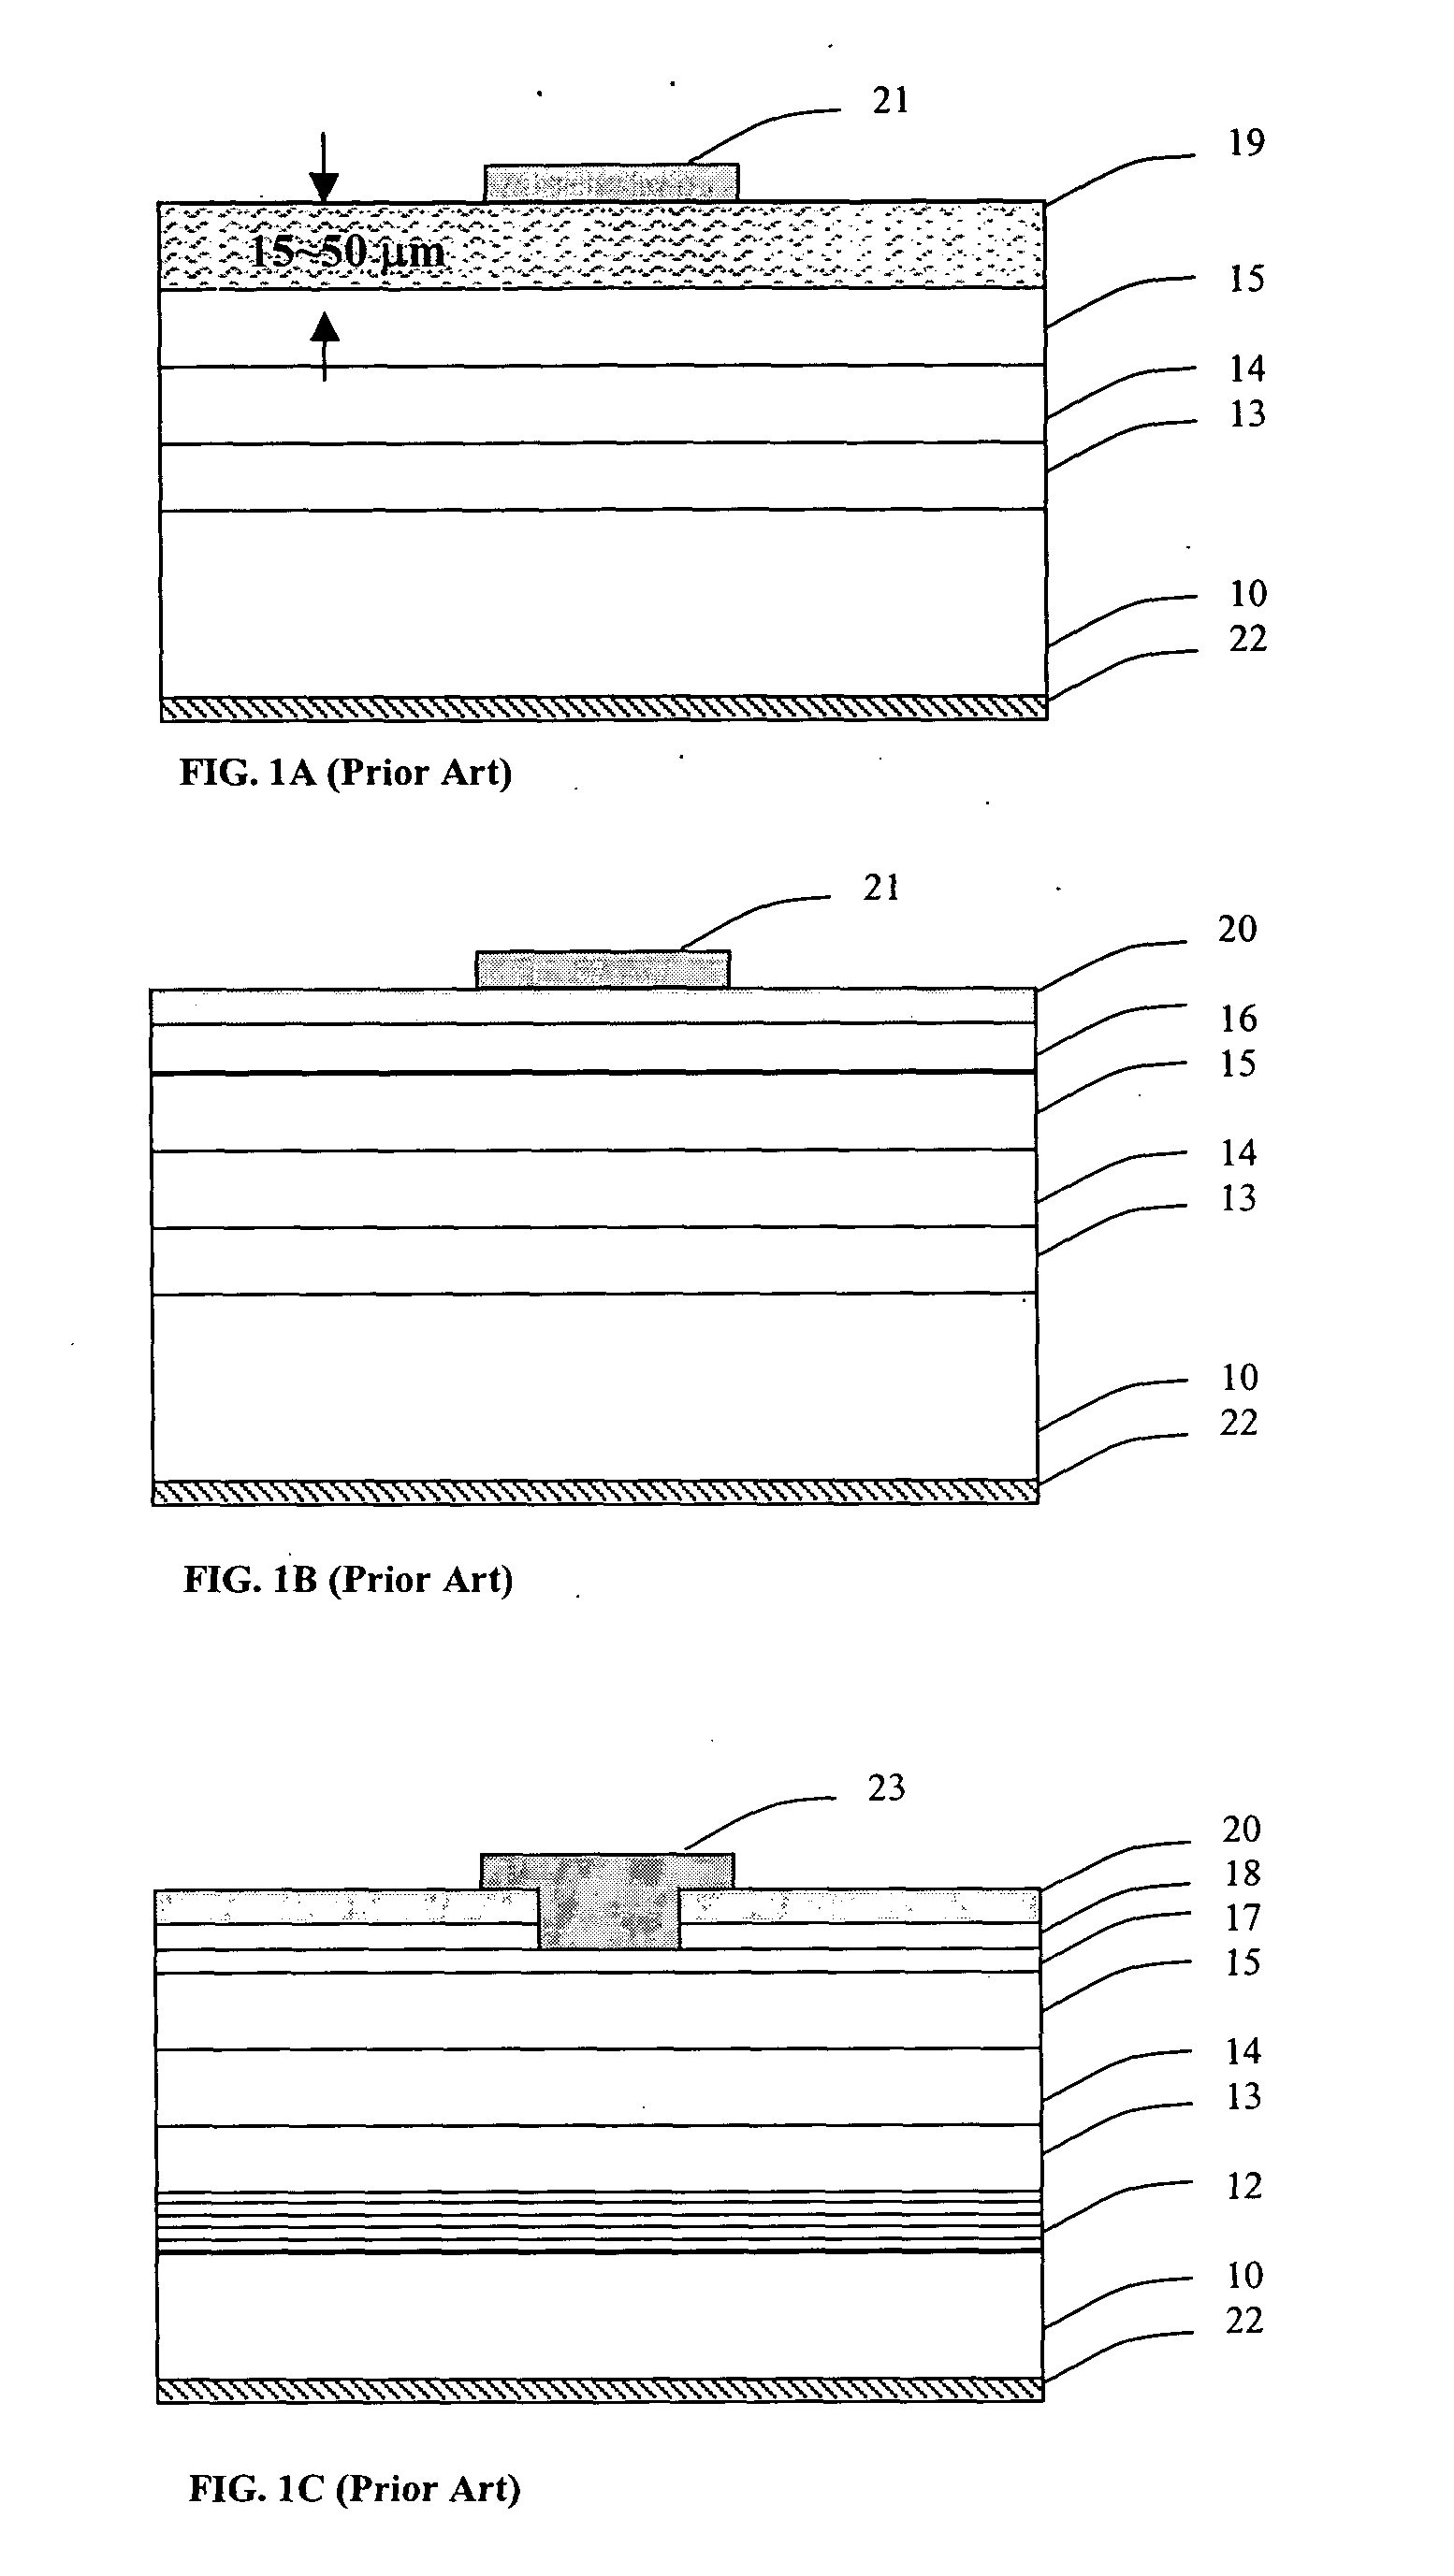 Light emiting diodes with current spreading layer